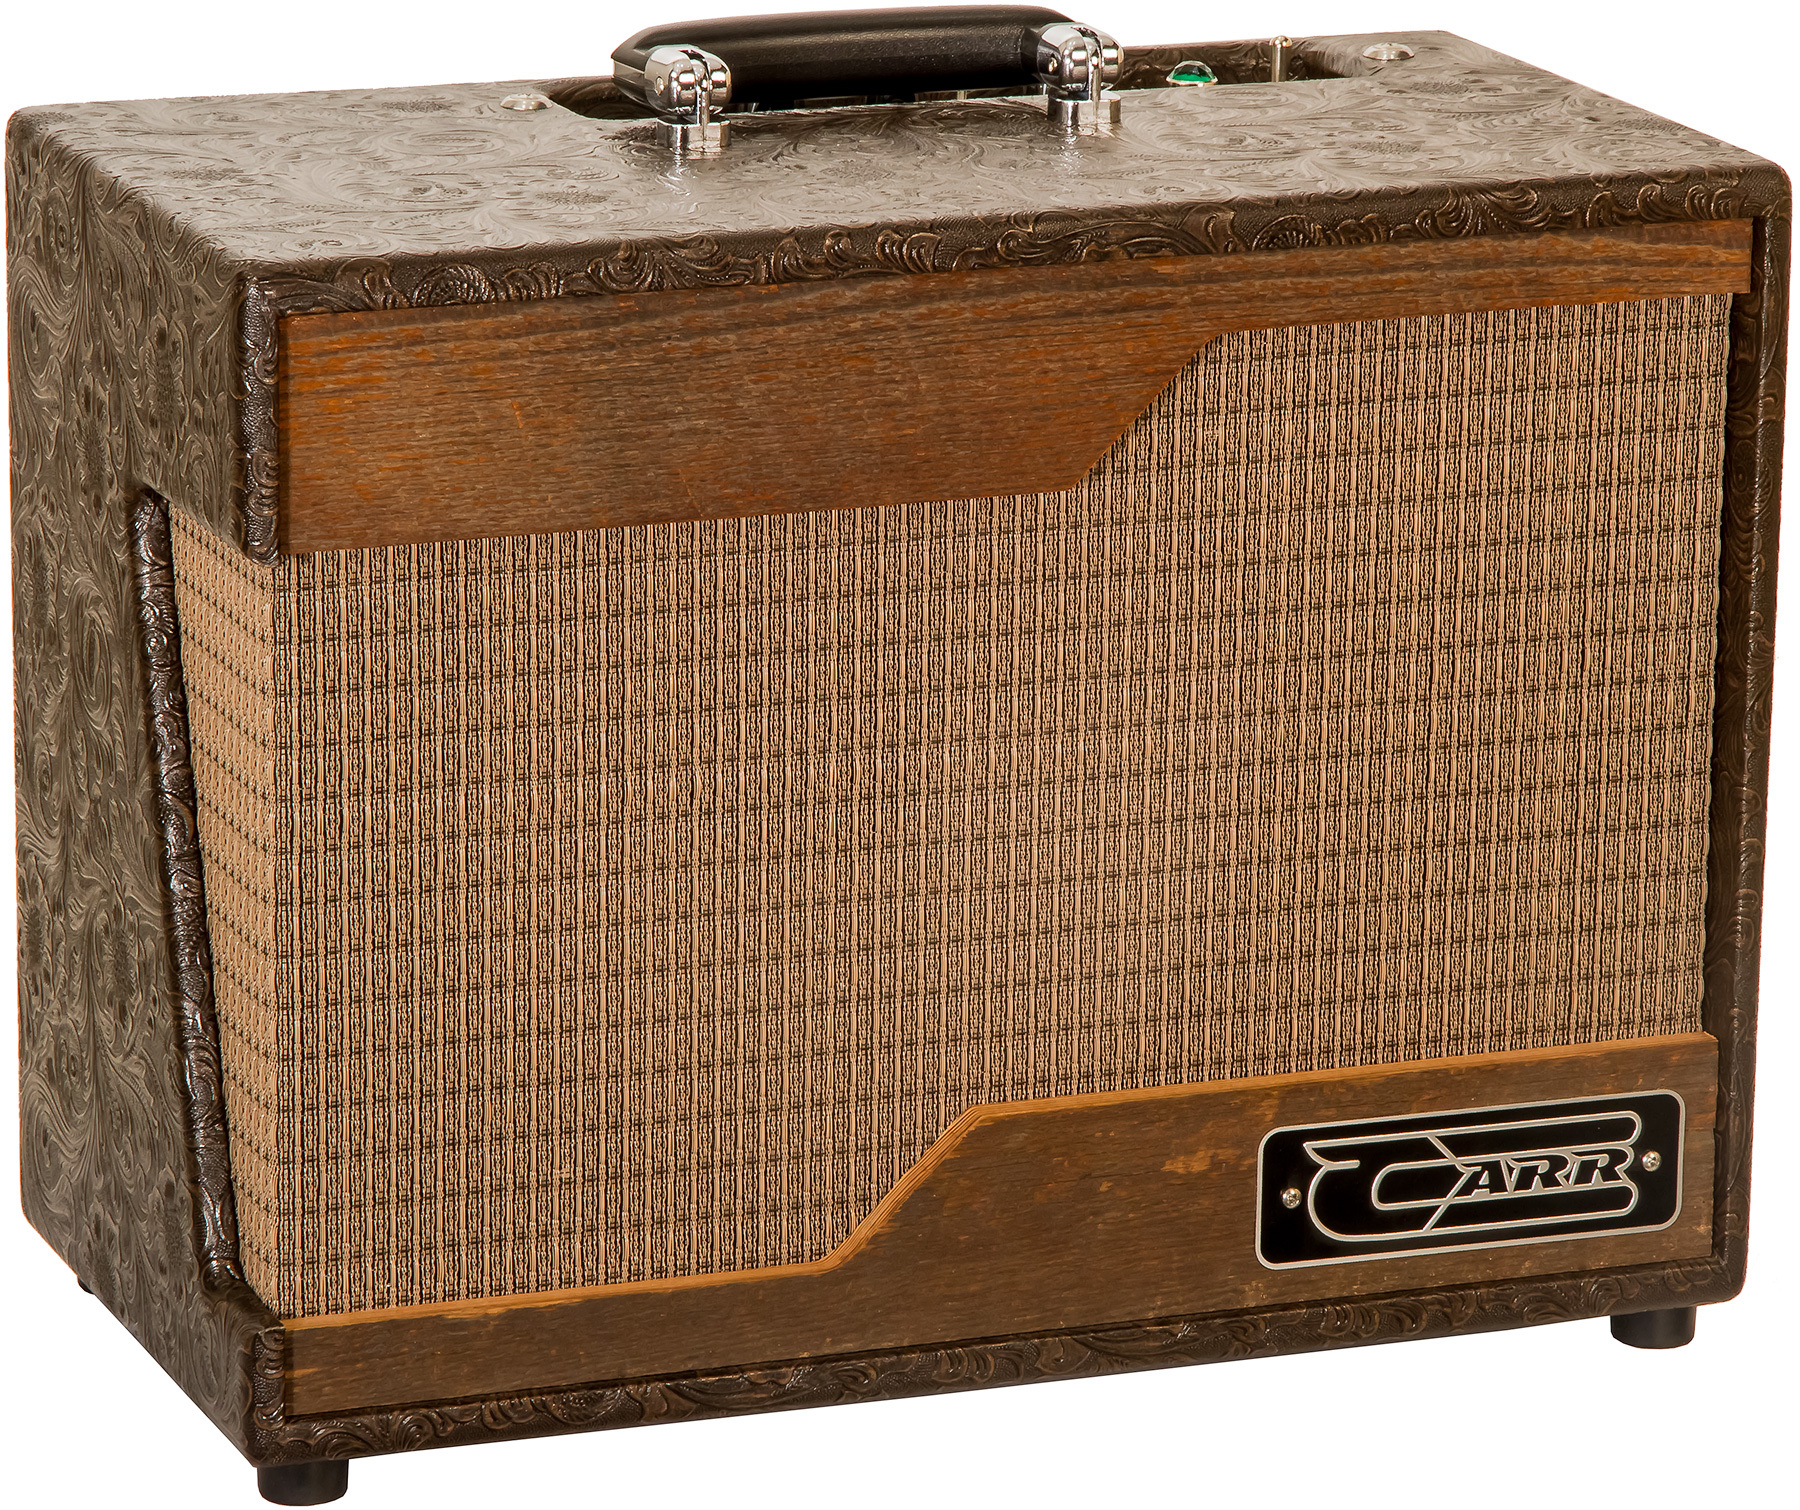 Carr Amplifiers Raleigh 1-10 Combo 5w 1x10 El84 Custom Cowboy - Electric guitar combo amp - Main picture